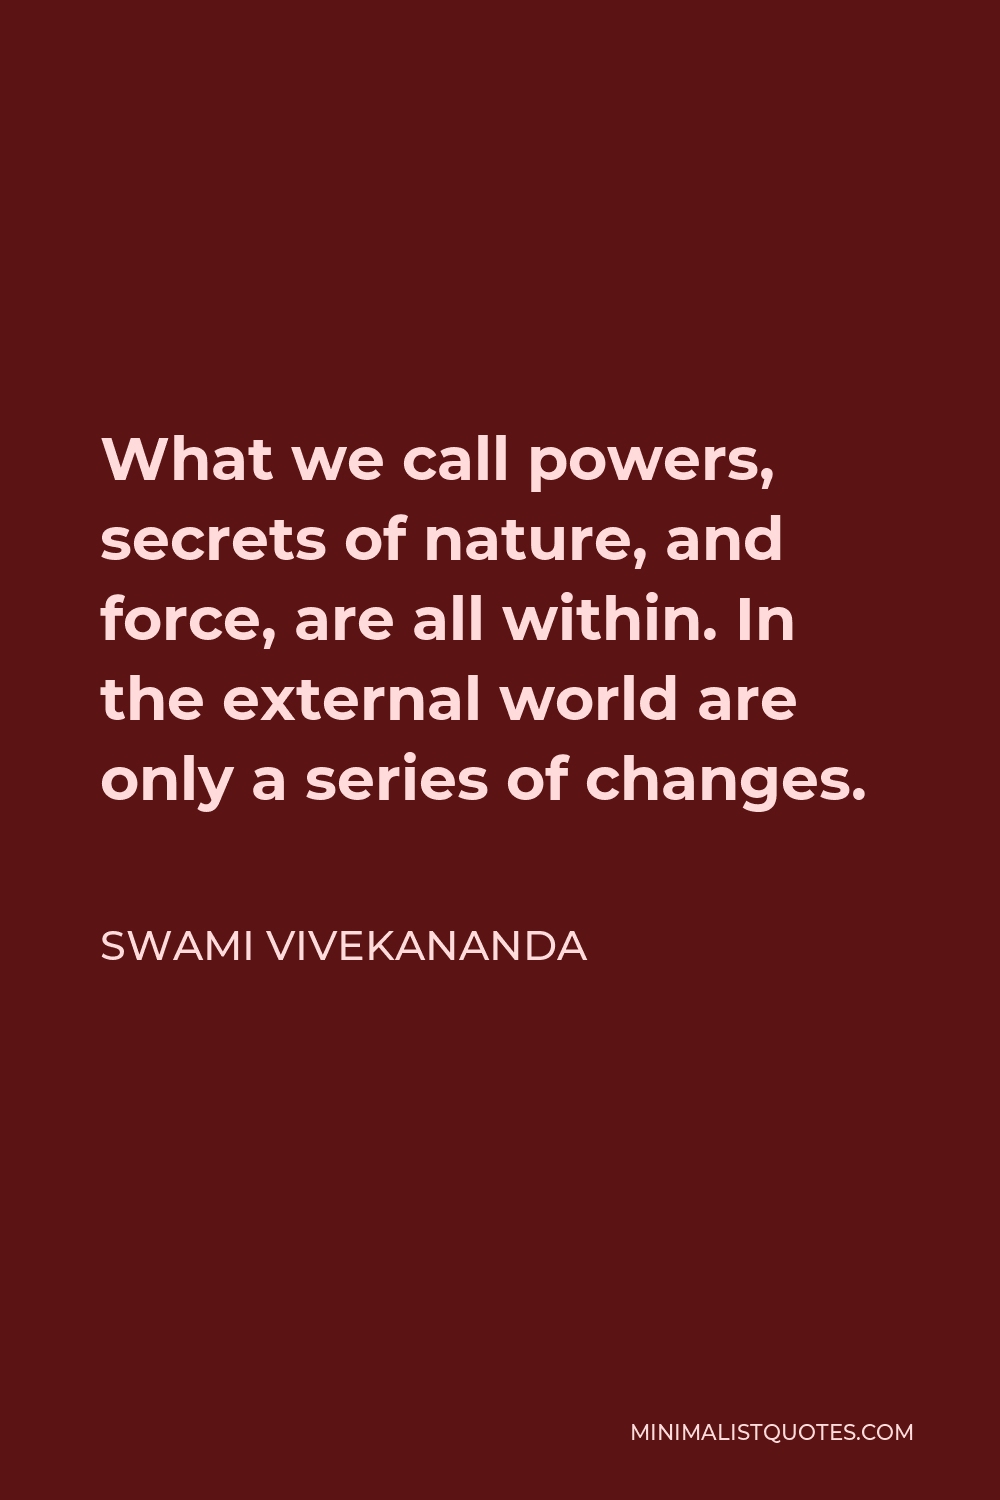 Swami Vivekananda Quote - What we call powers, secrets of nature, and force, are all within. In the external world are only a series of changes.